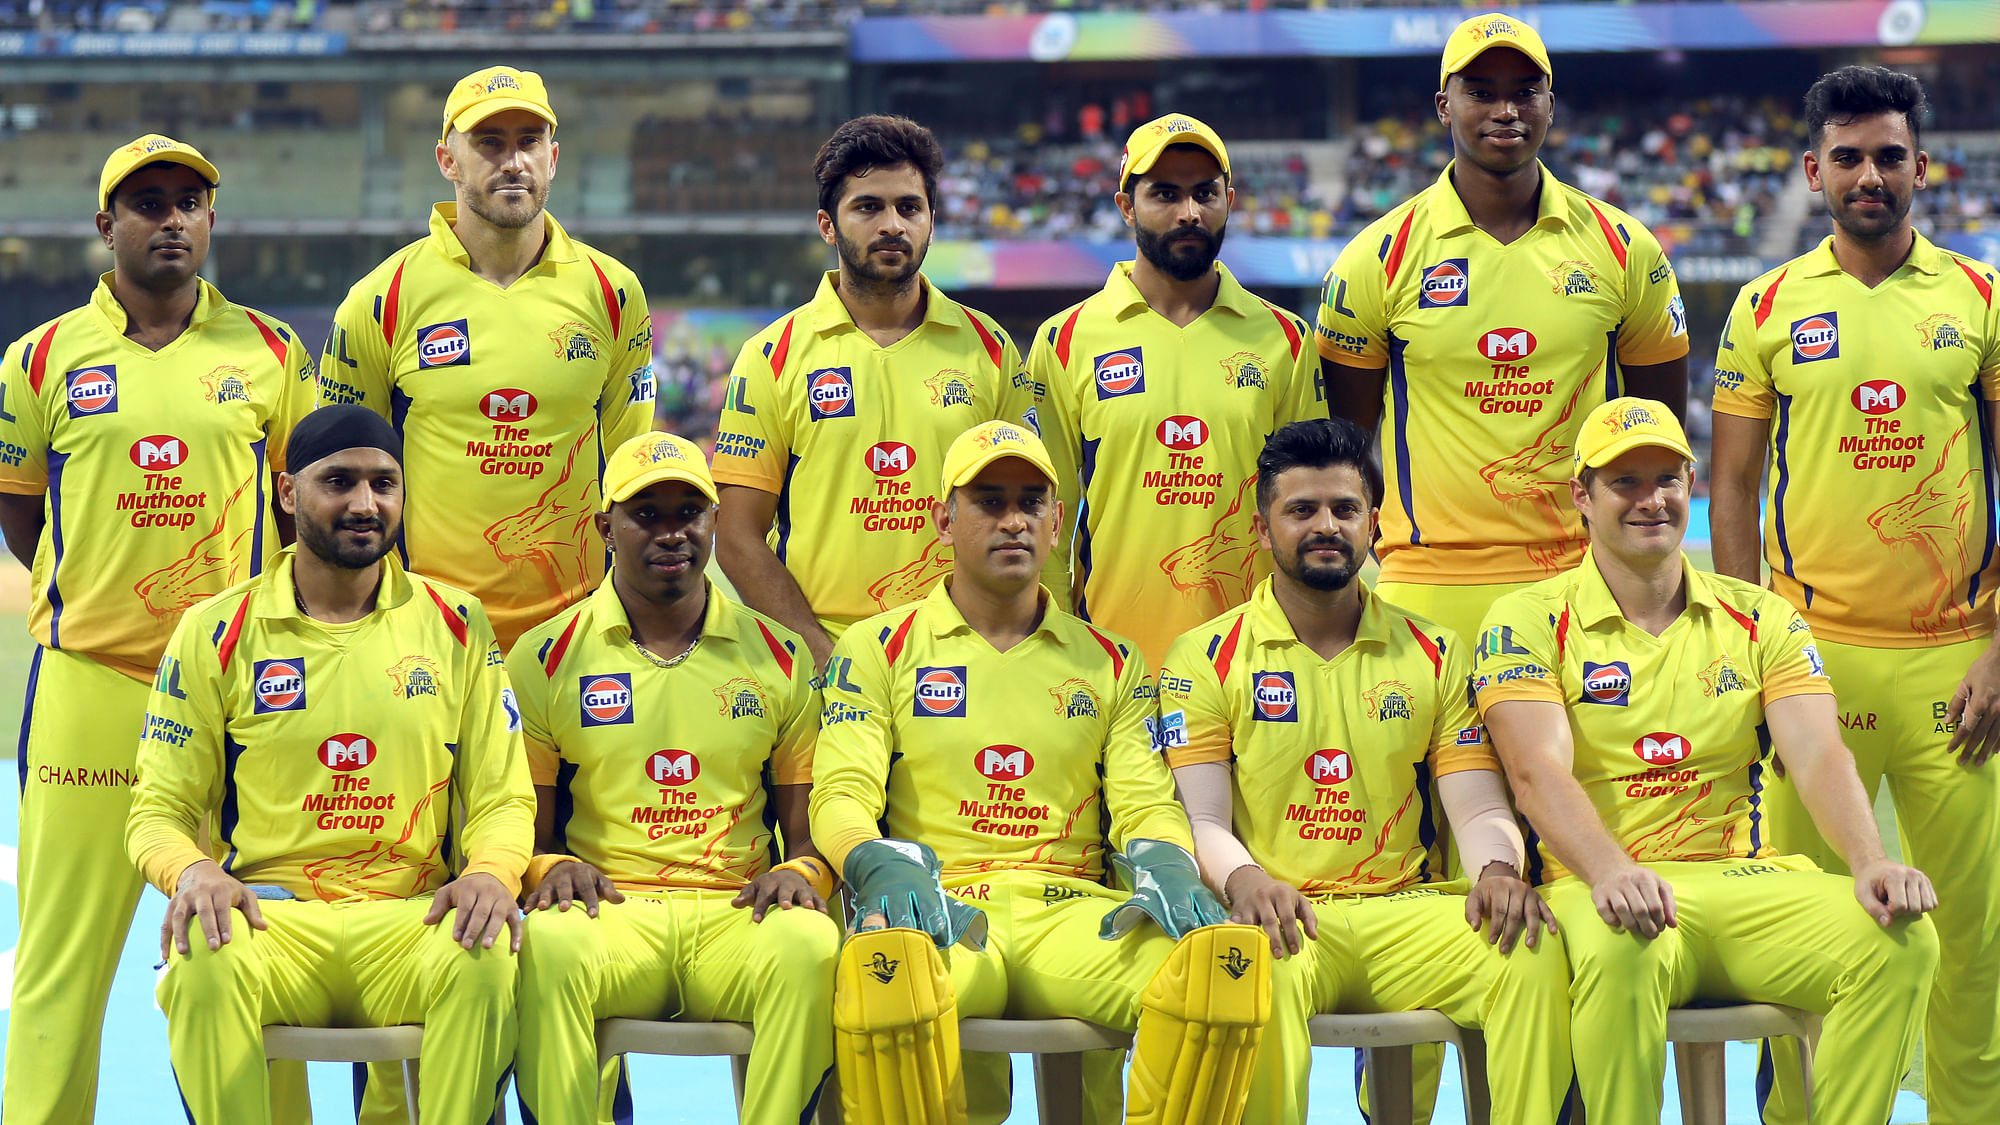 Chennai Super Kings players pose for a group picture during Qualifier 1 of the Vivo Indian Premier League 2018 against Sunrisers Hyderabad at the Wankhede Stadium in Mumbai on the 22nd May 2018.